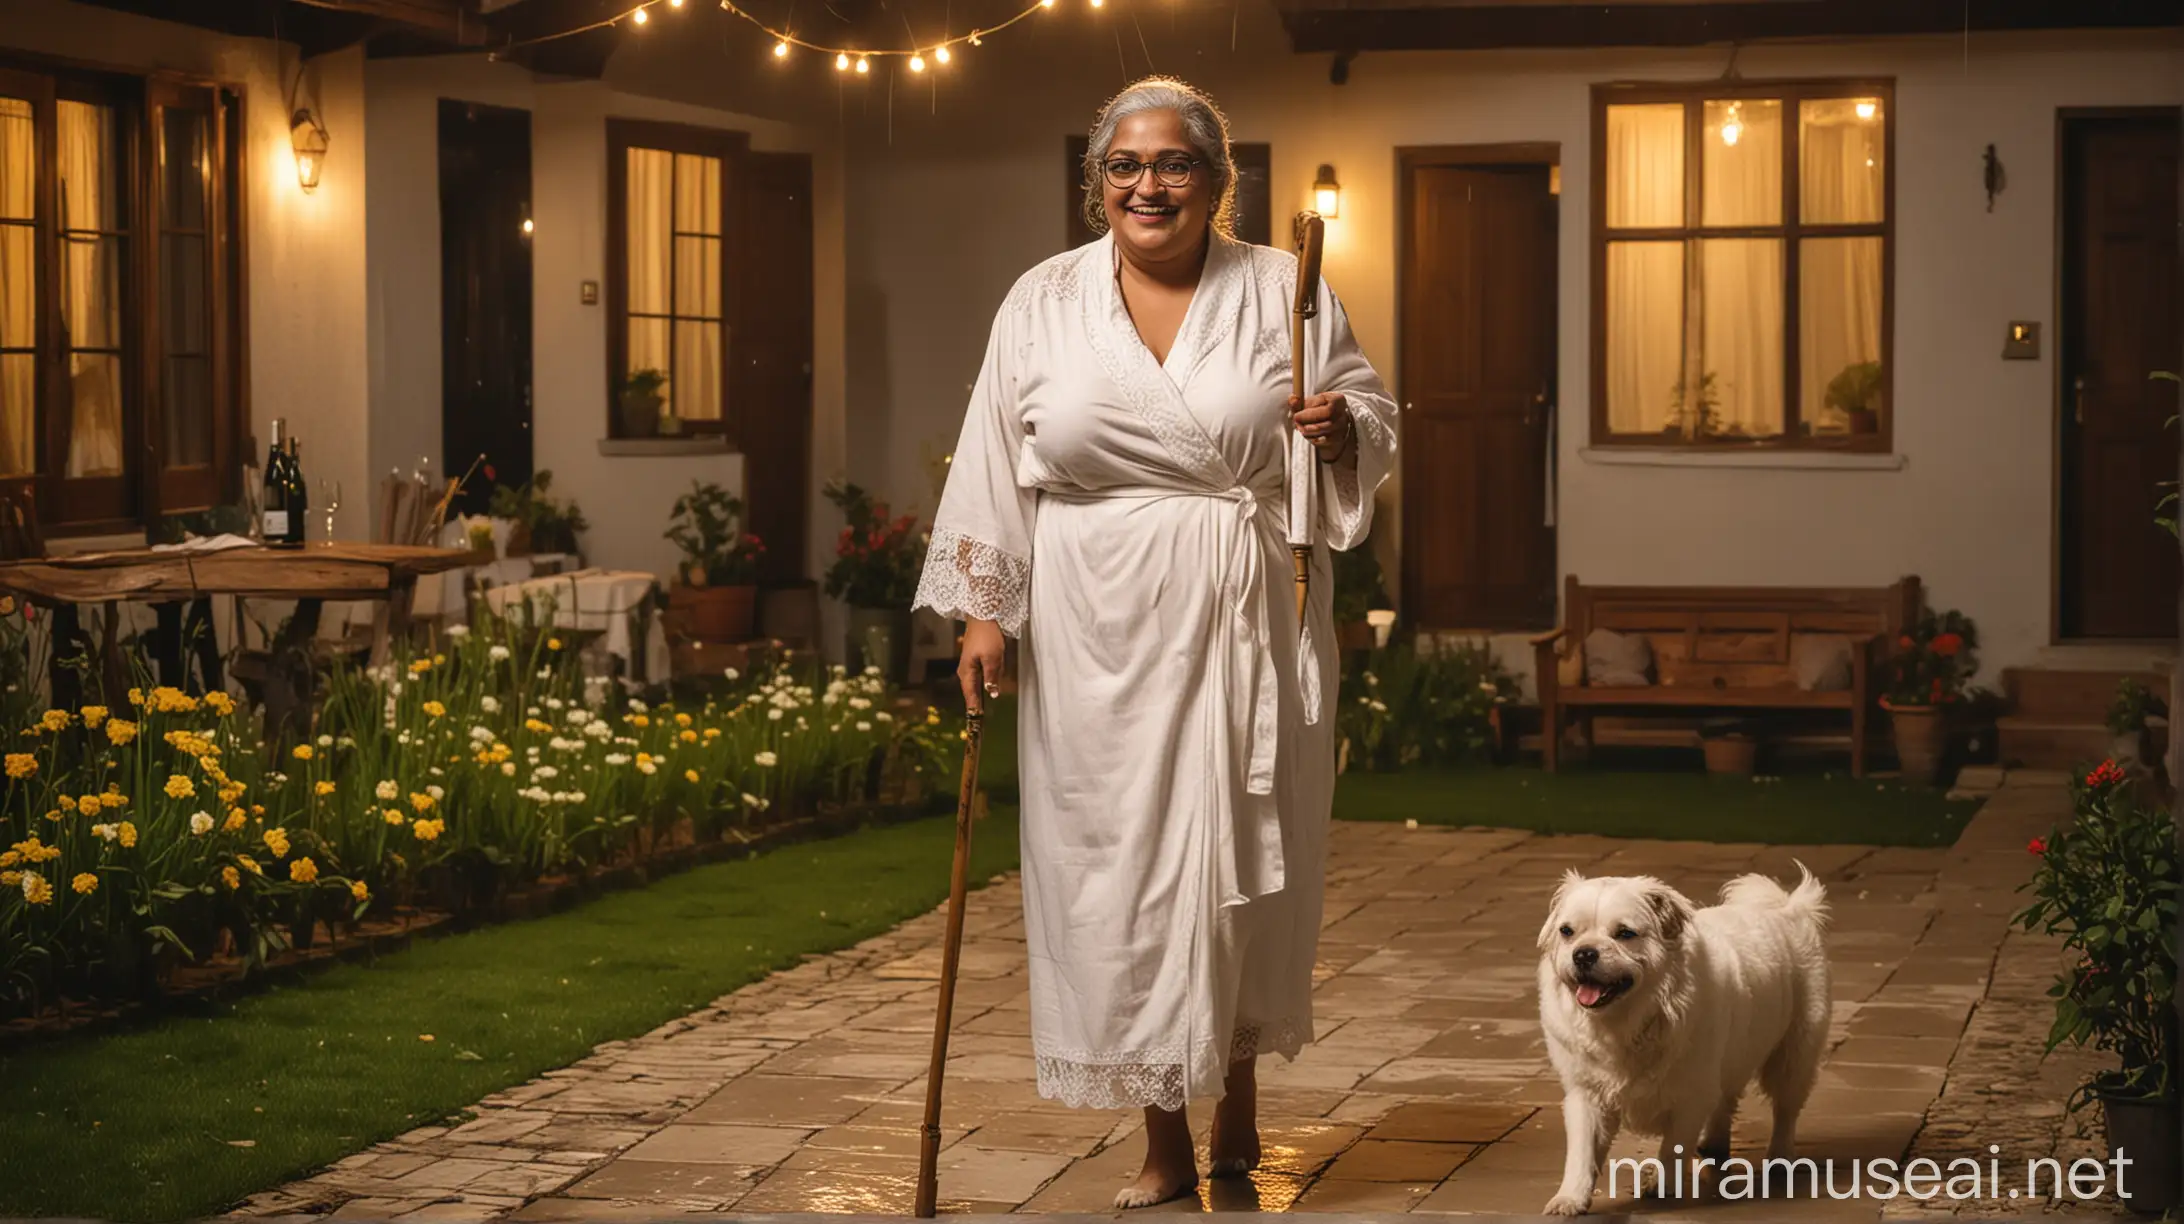 sweet faced old desi  very curvy  fat   woman  with big breasts with tick hair binding on head and big belly walking holding   wooden walking stick wearing   only a transparent white bath robe  on her body  and a golden neck lace and a spectacles. she is happy and laughing . she is  walking with her dog  . its night  time and in background there is a luxurious farm house  with bulb light and luxurious house   with flowers and grass and concrete floor and it is raining . she is wearing heels on feet.  beside on table ther is wine bottle and glass are with mutton curry are there.